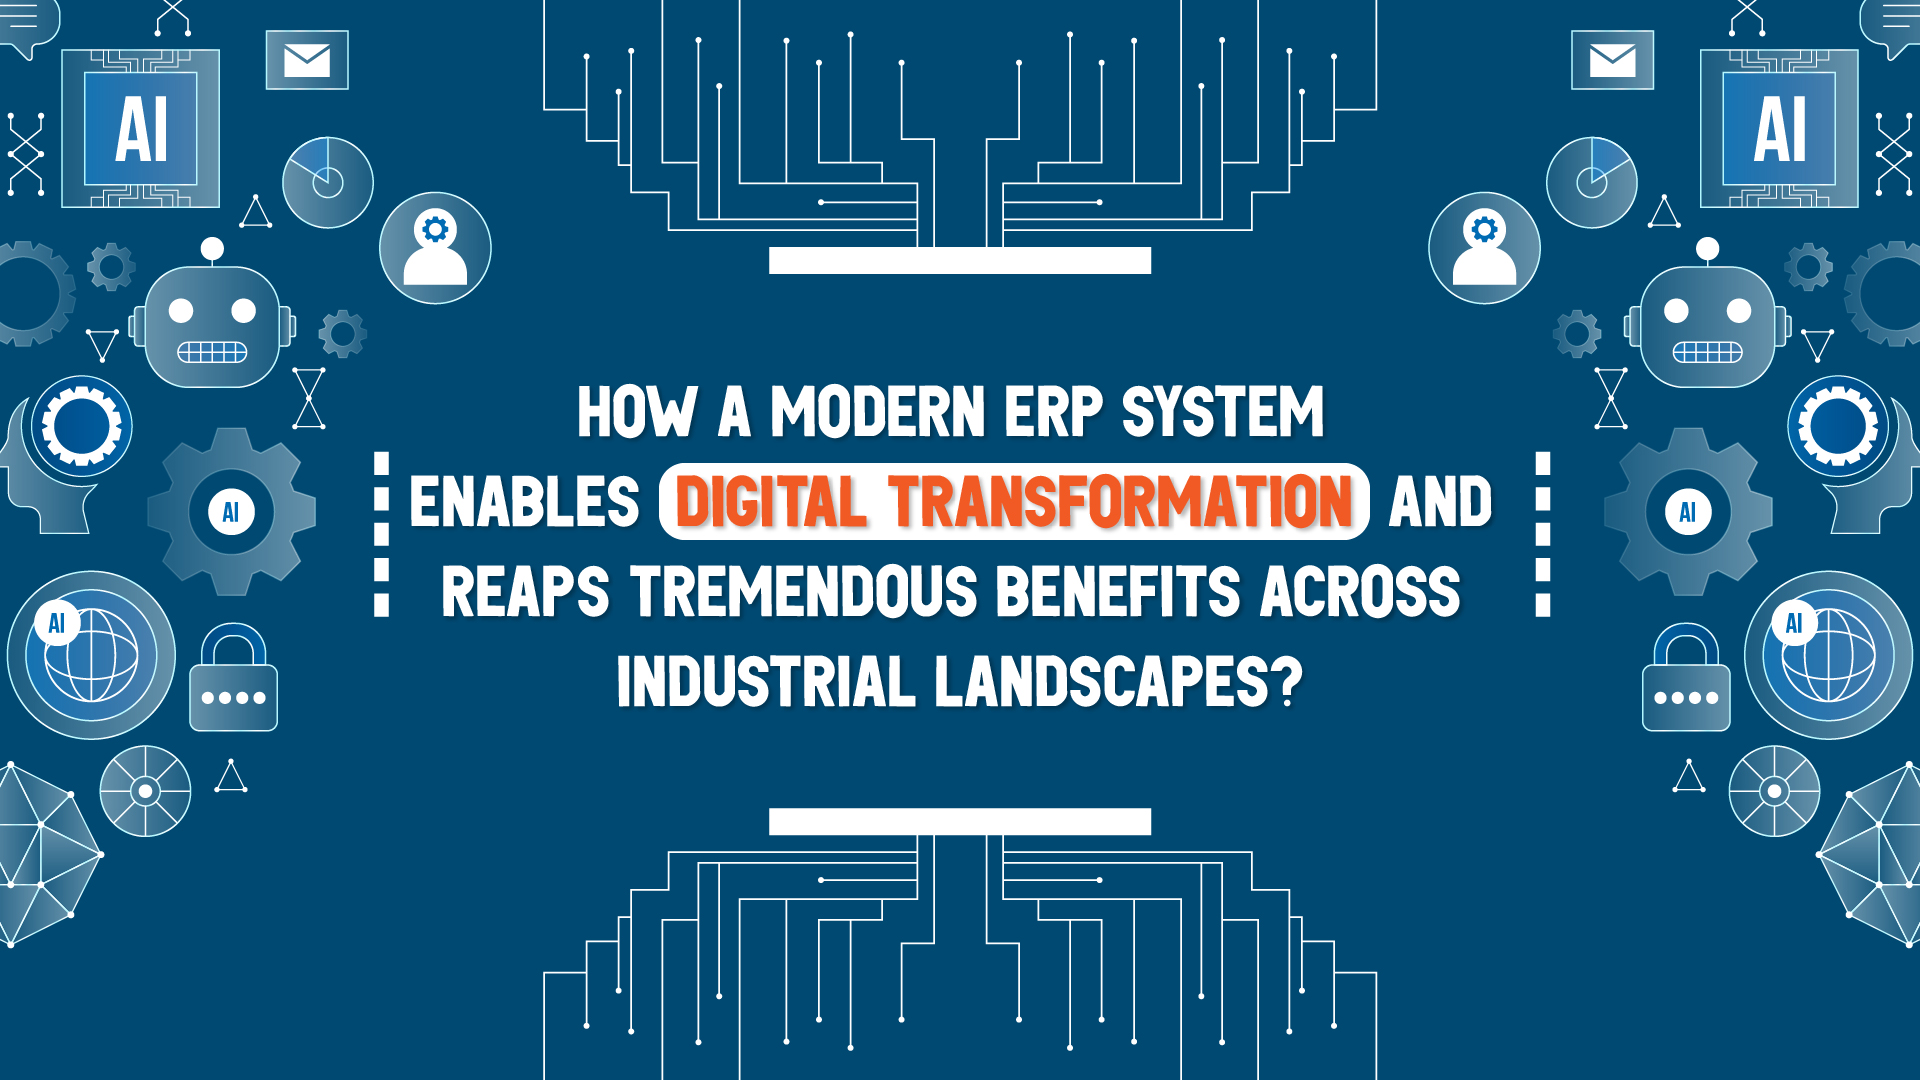 How a Modern ERP System Enables Digital Transformation and Reaps Tremendous Benefits Across Industrial Landscapes?